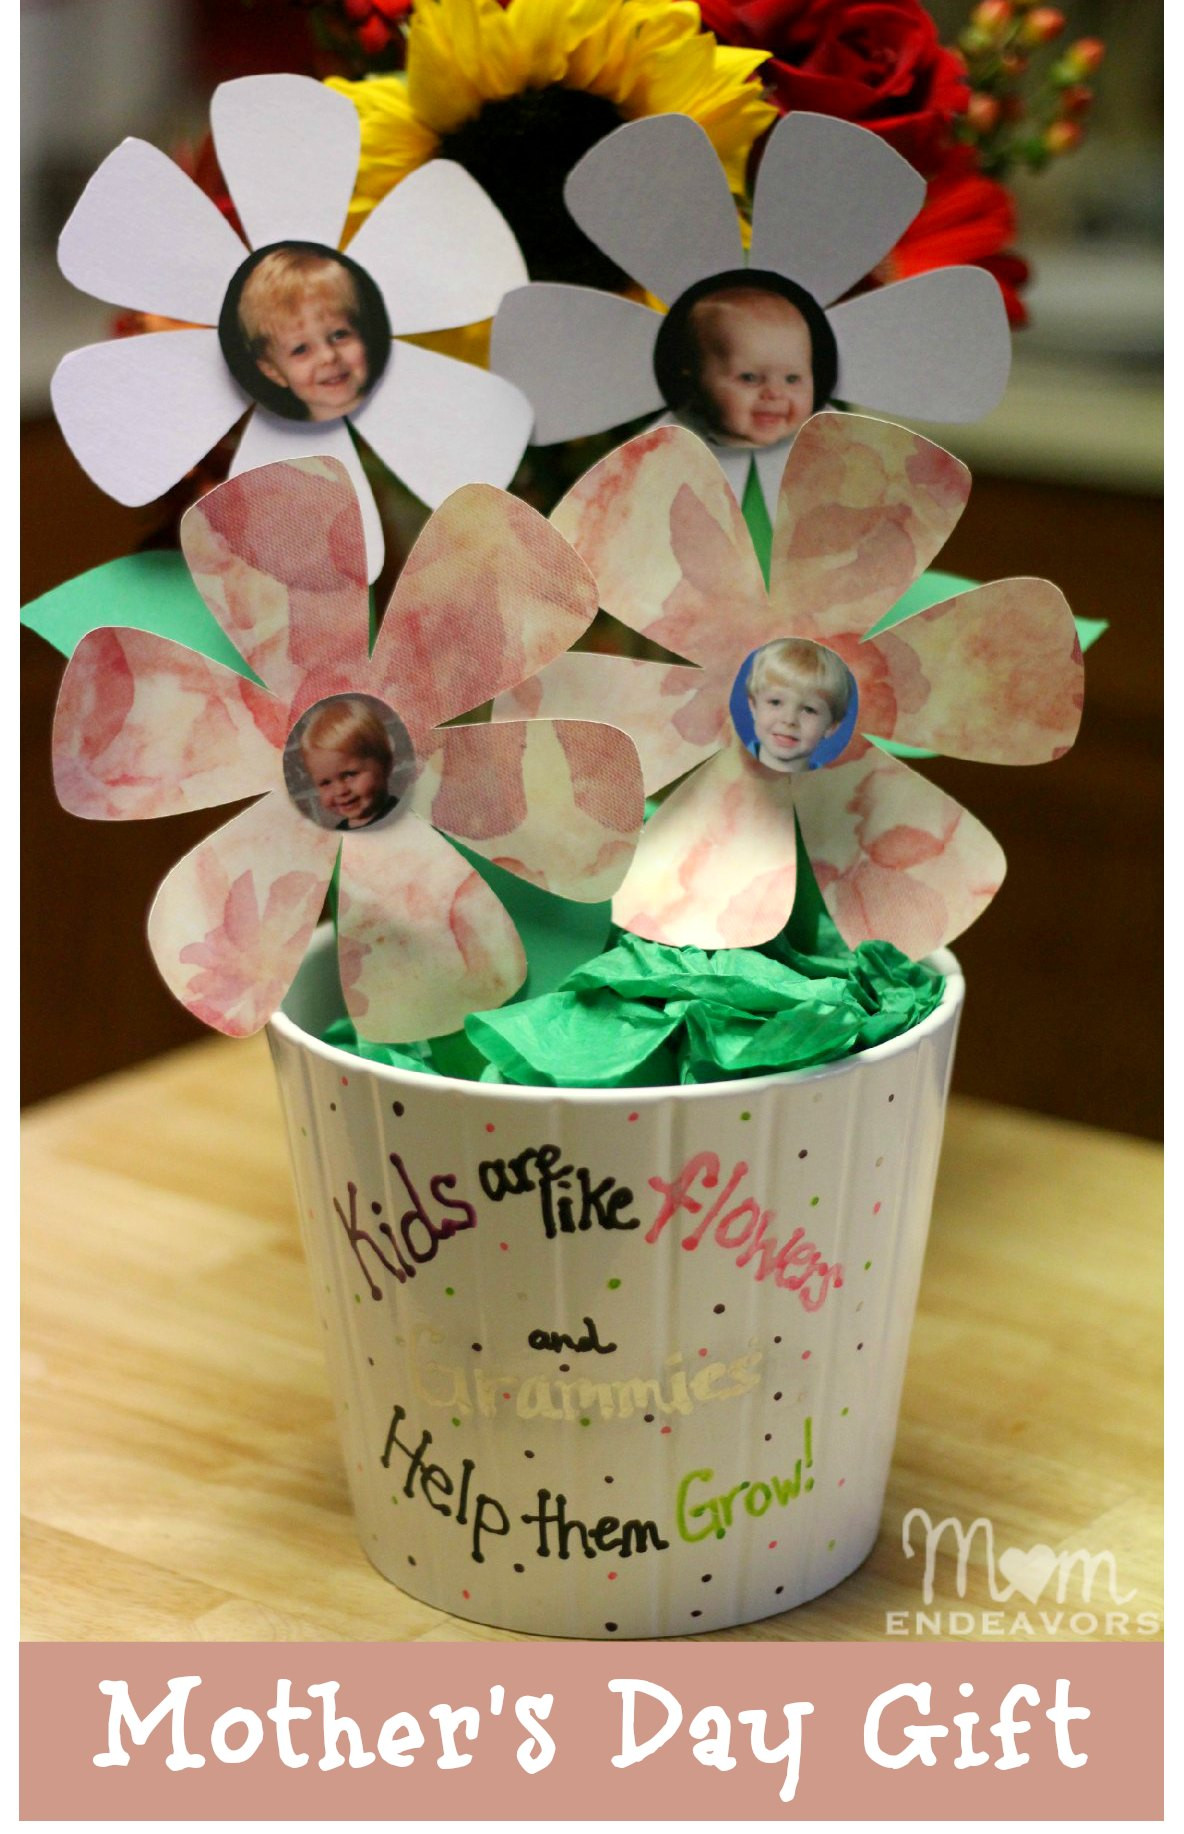 Mothers Day Ideas To Make
 How to Choose a Meaningful Mother’s Day Gift